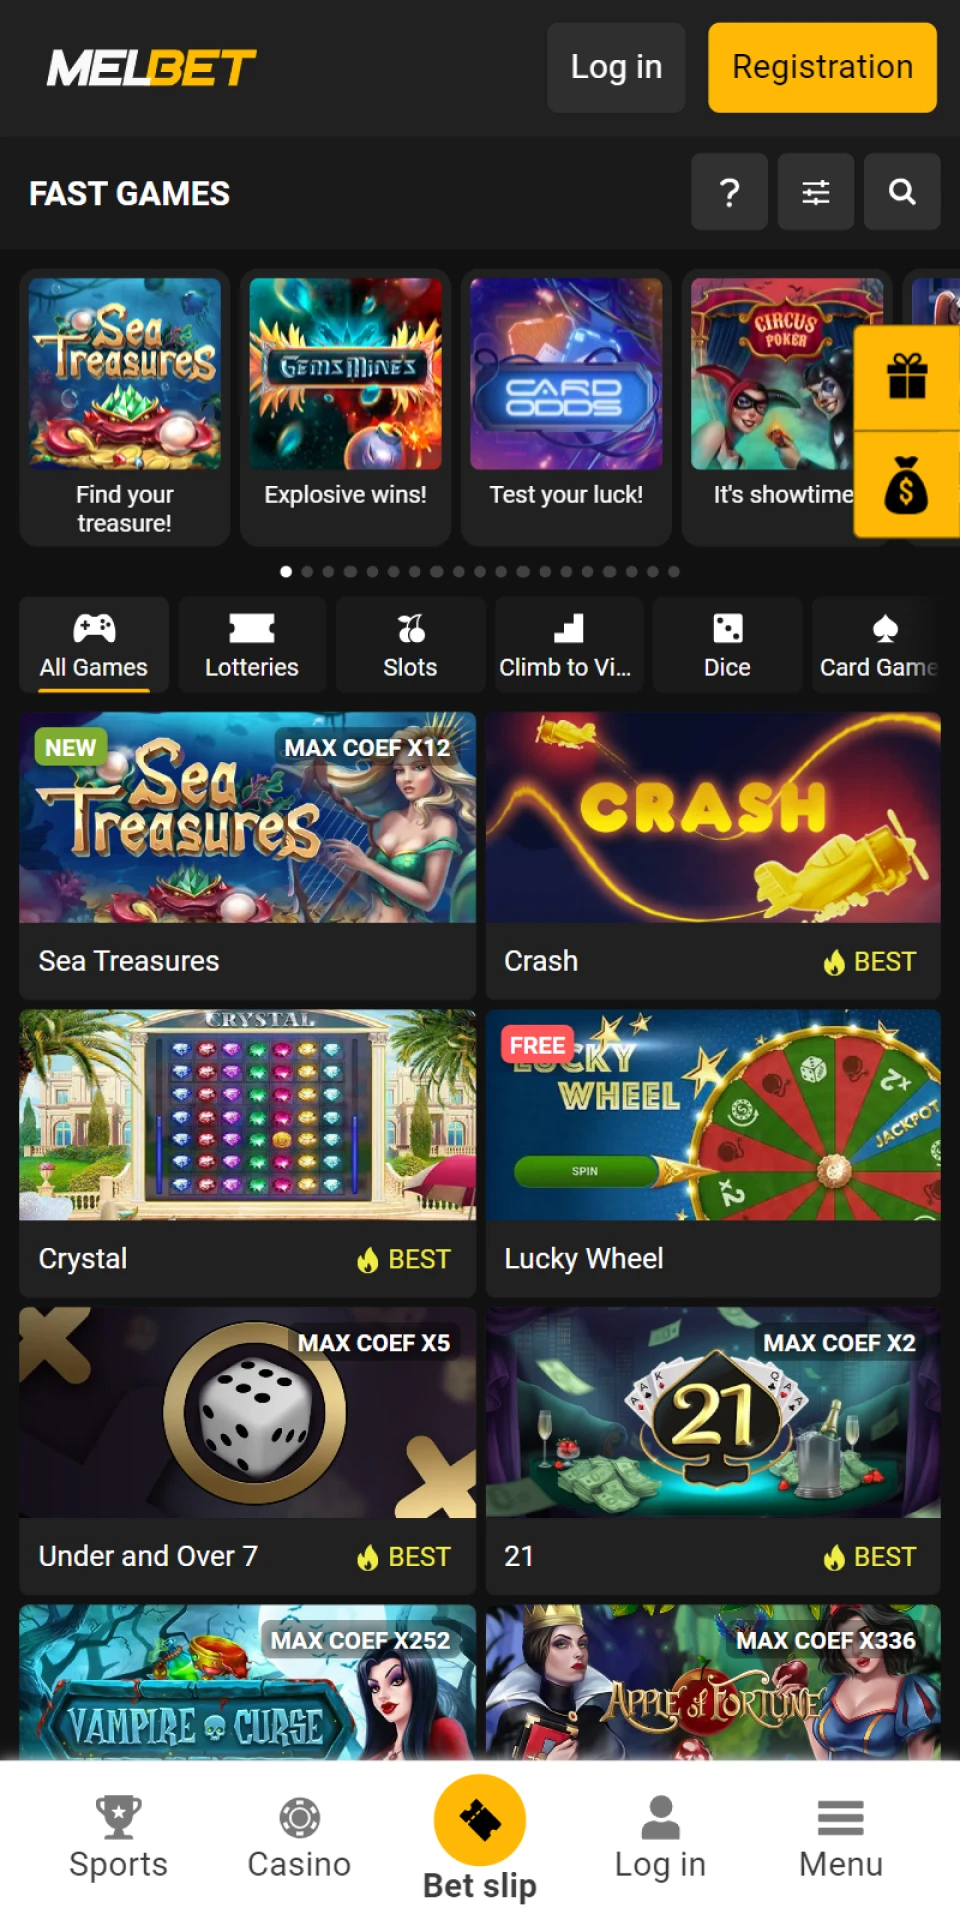 Play casino games on the Melbet mobile app.